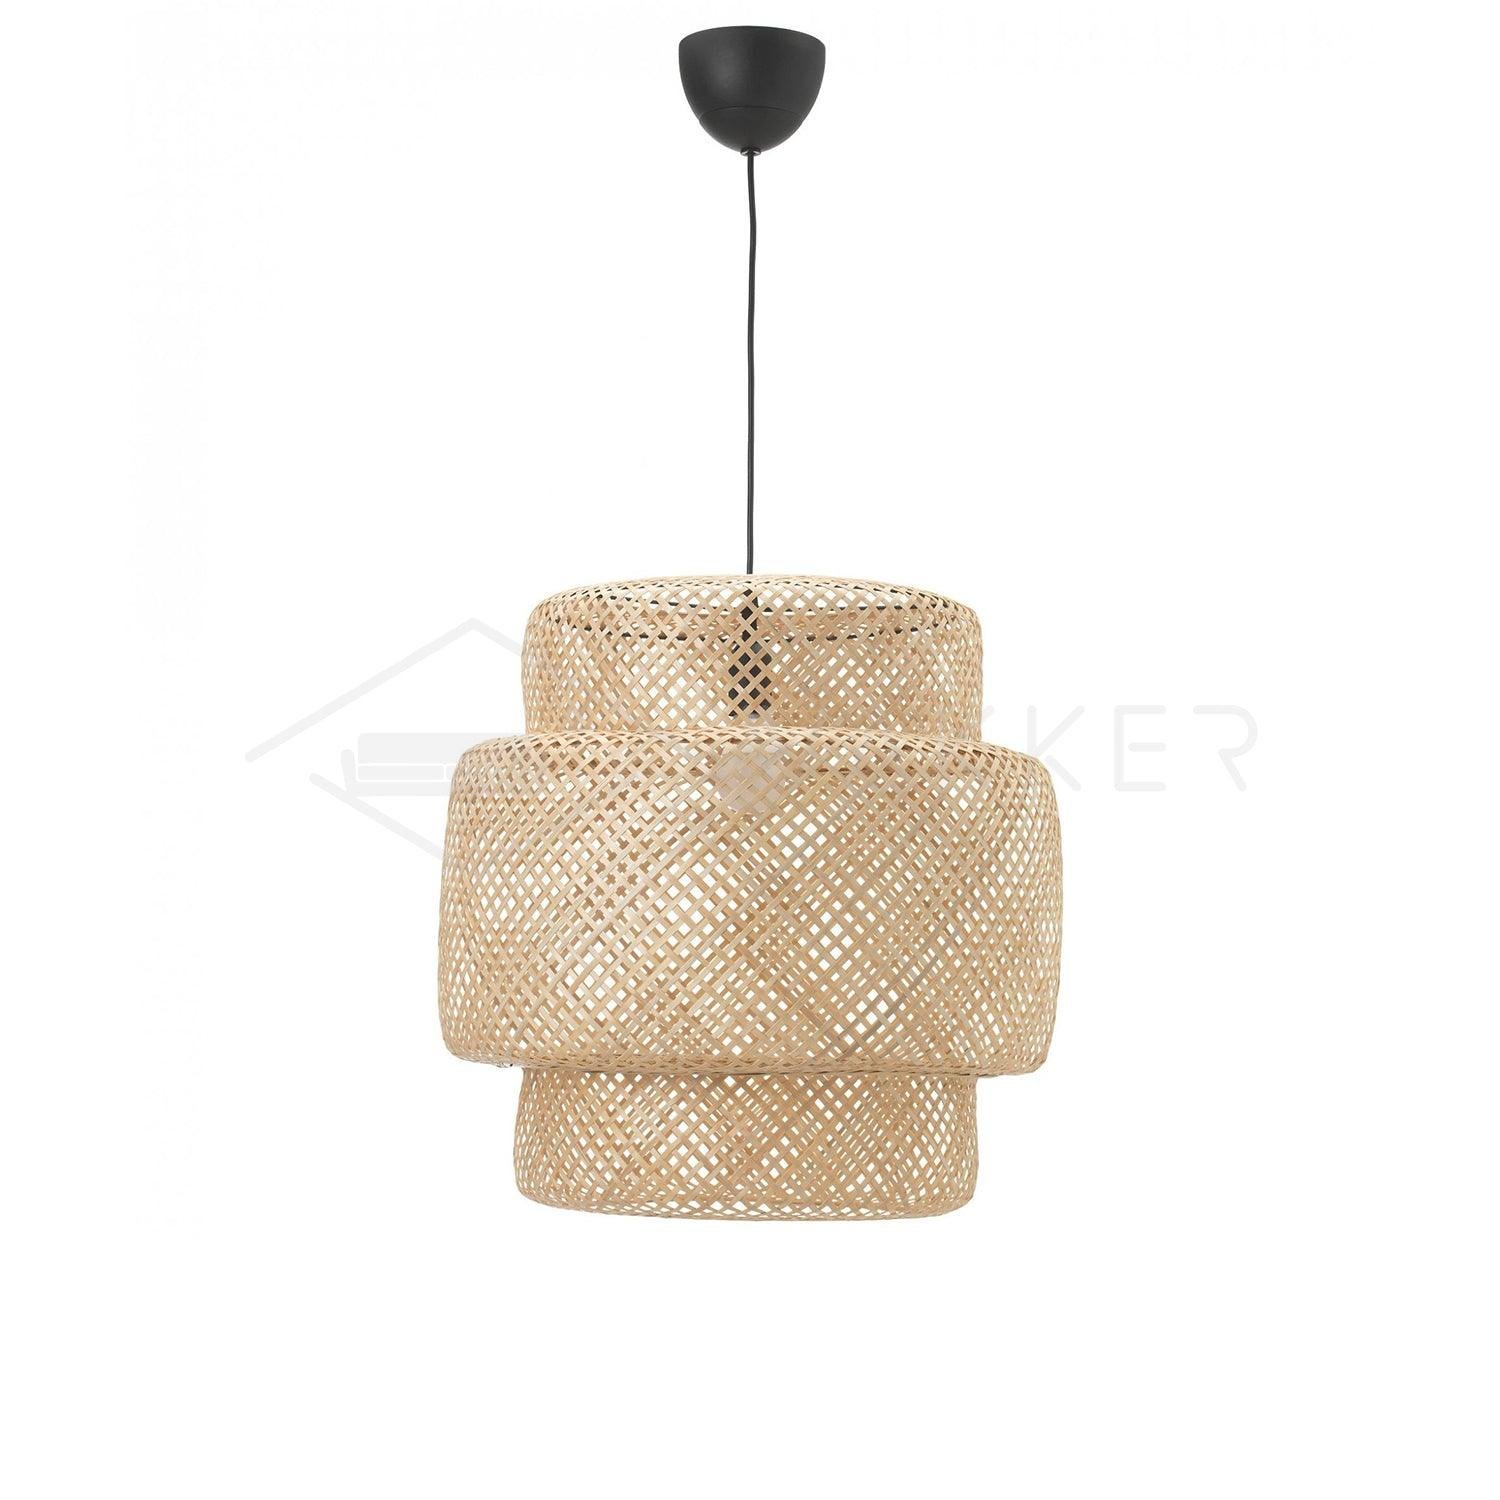 Bamboo Pendant Light with a Diameter and Height of 15.8 inches (40cm x 40cm)